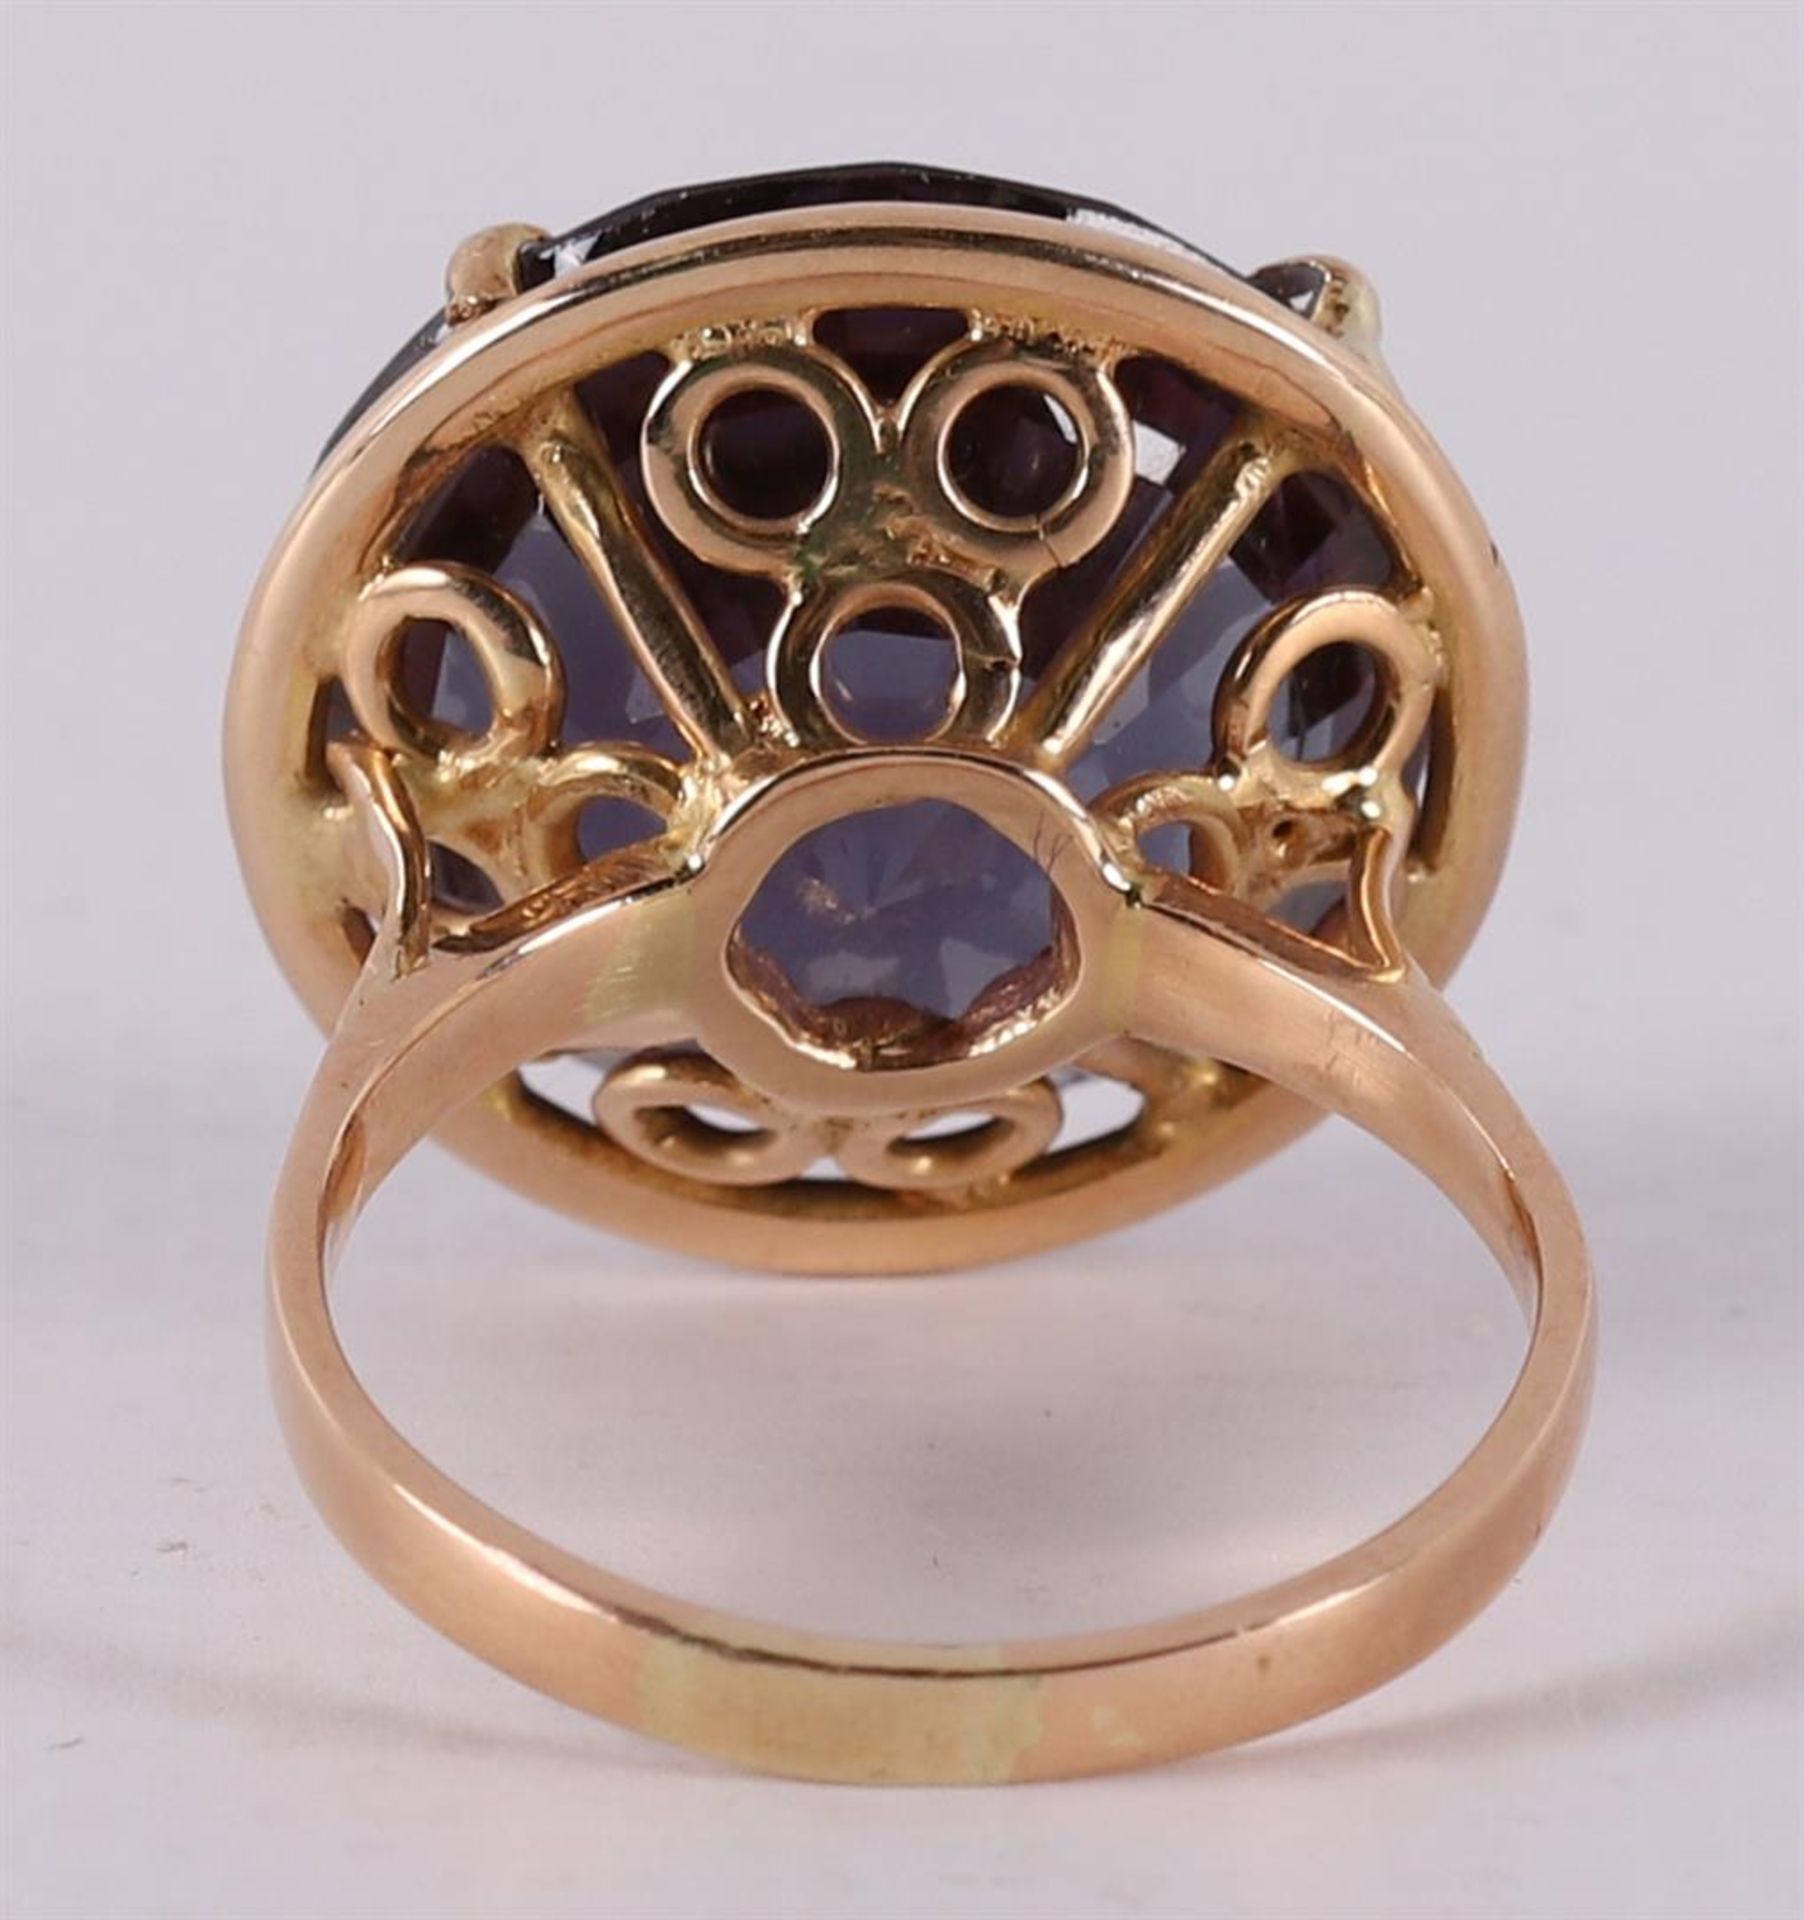 A 14 kt gold ring set with faceted colored stones. - Image 3 of 3